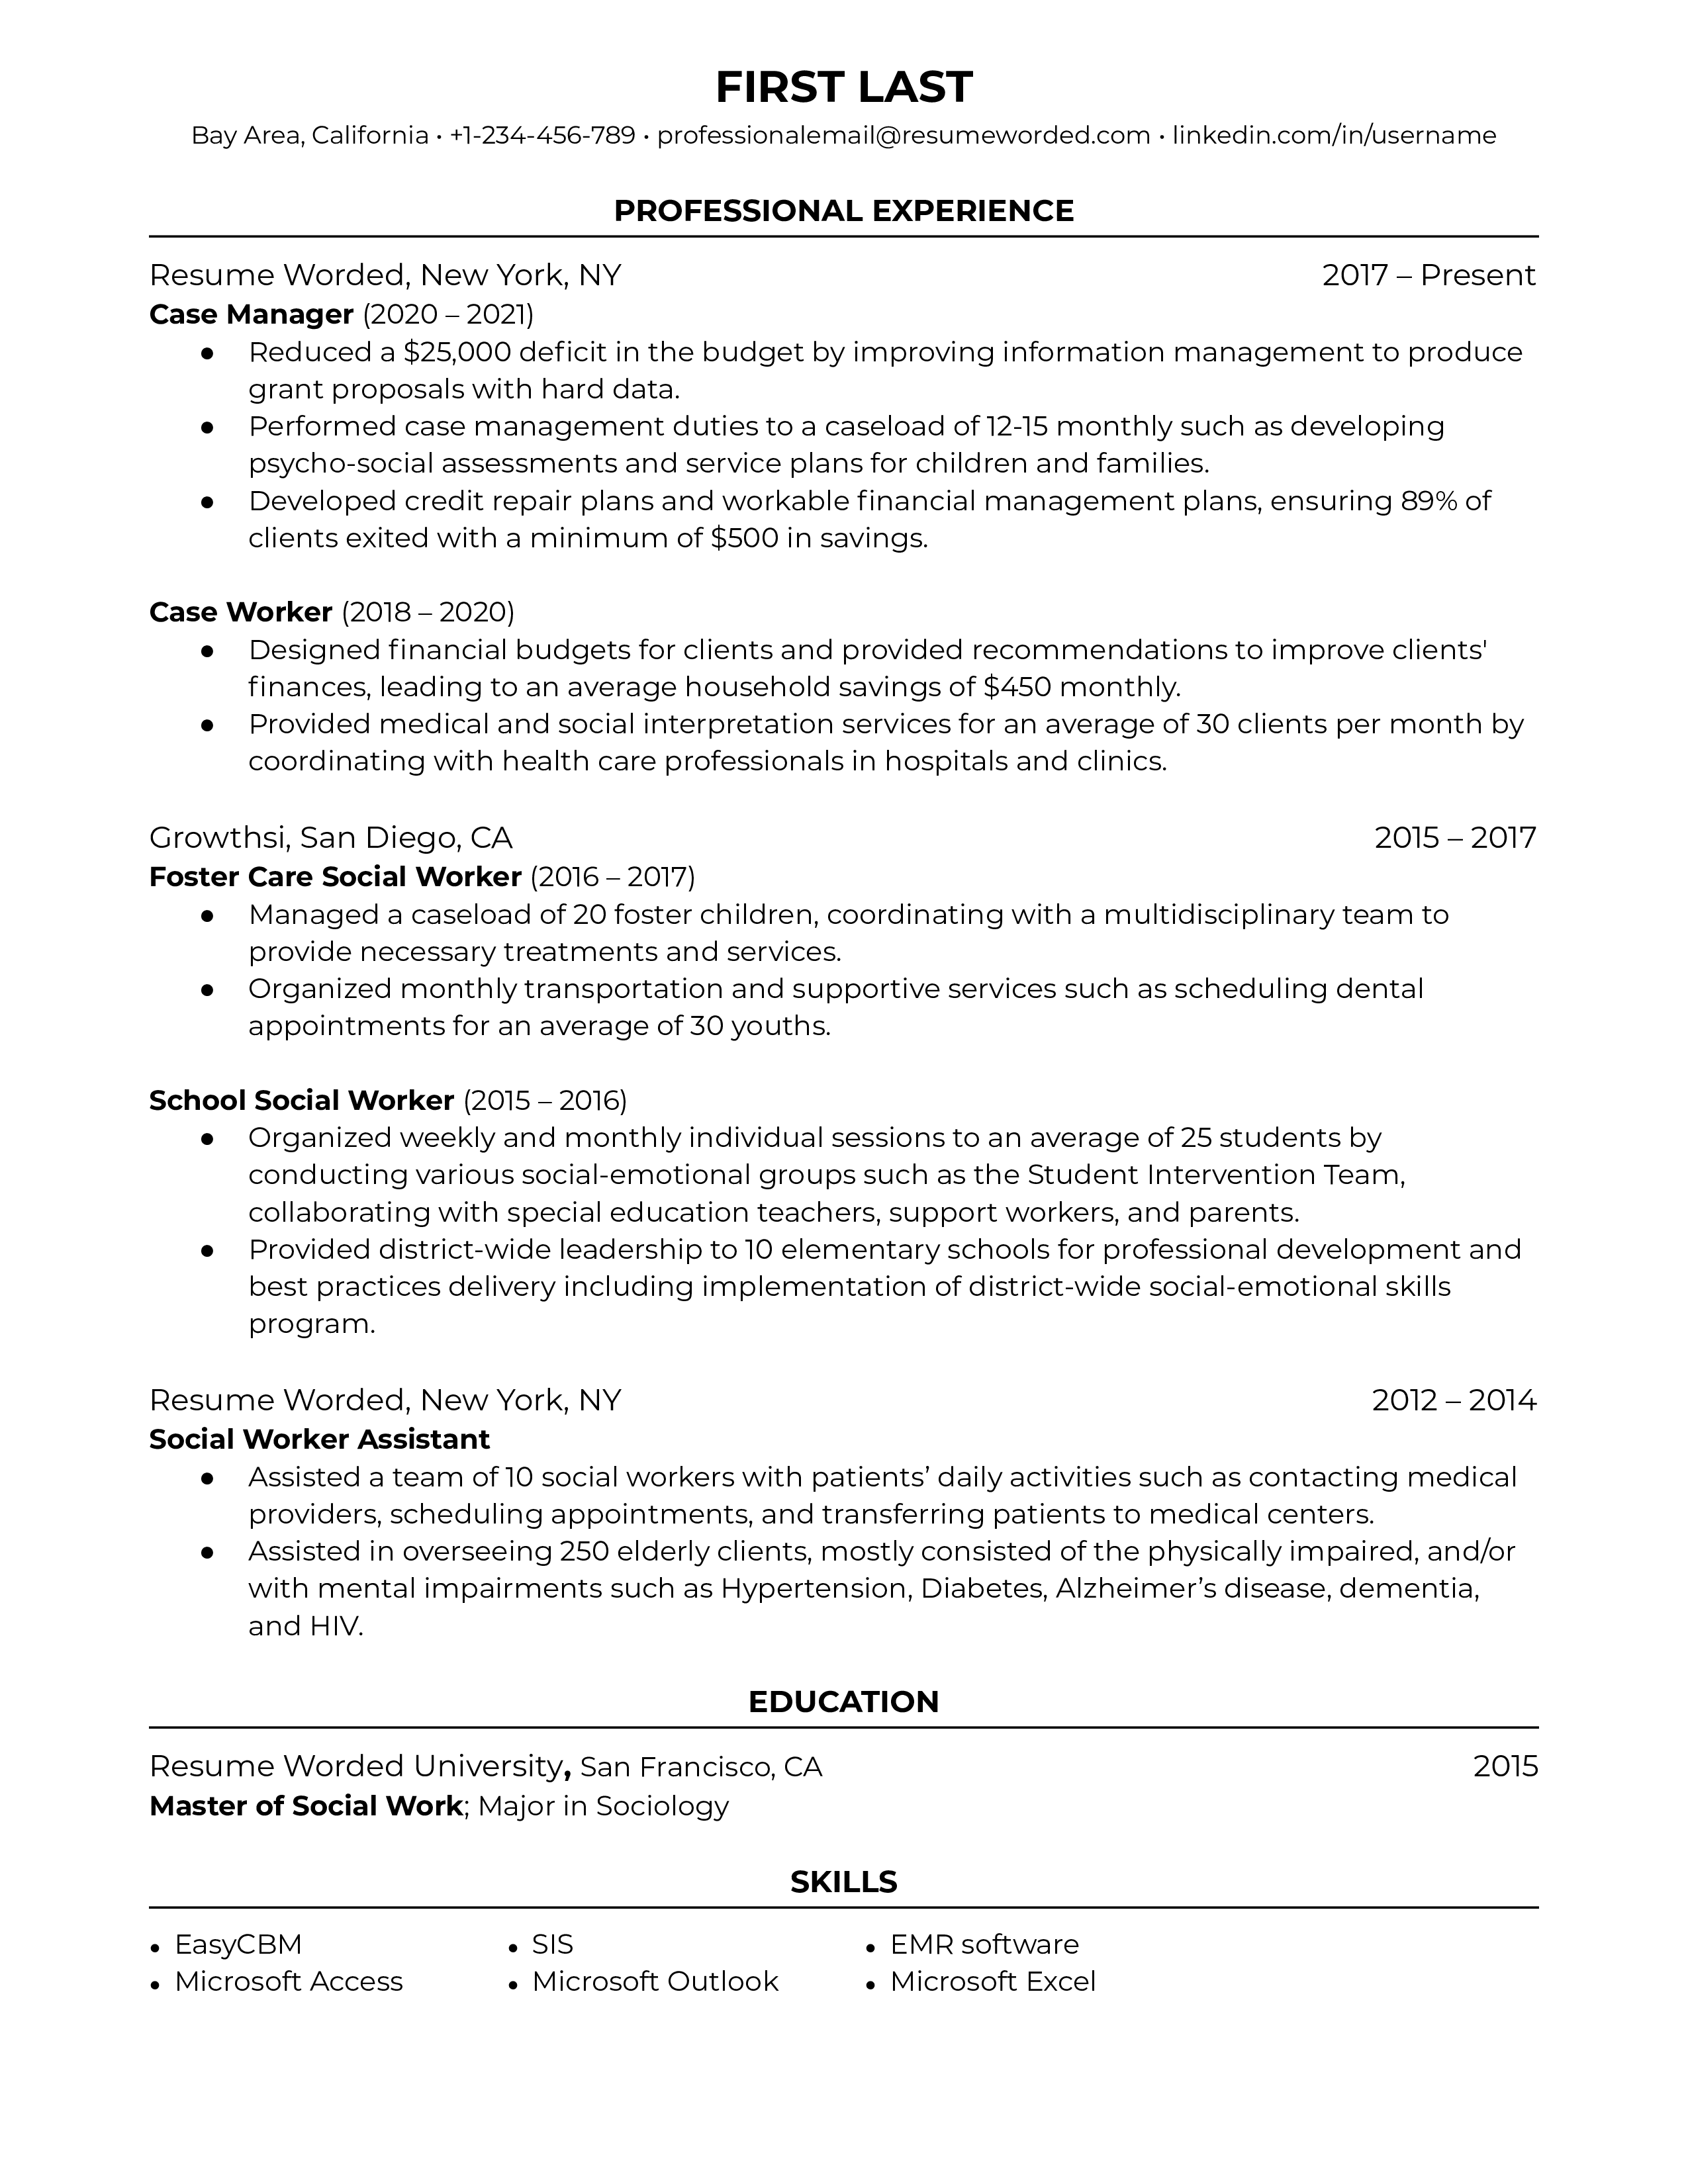 A case manager's resume showcasing skills, experience, and certifications.